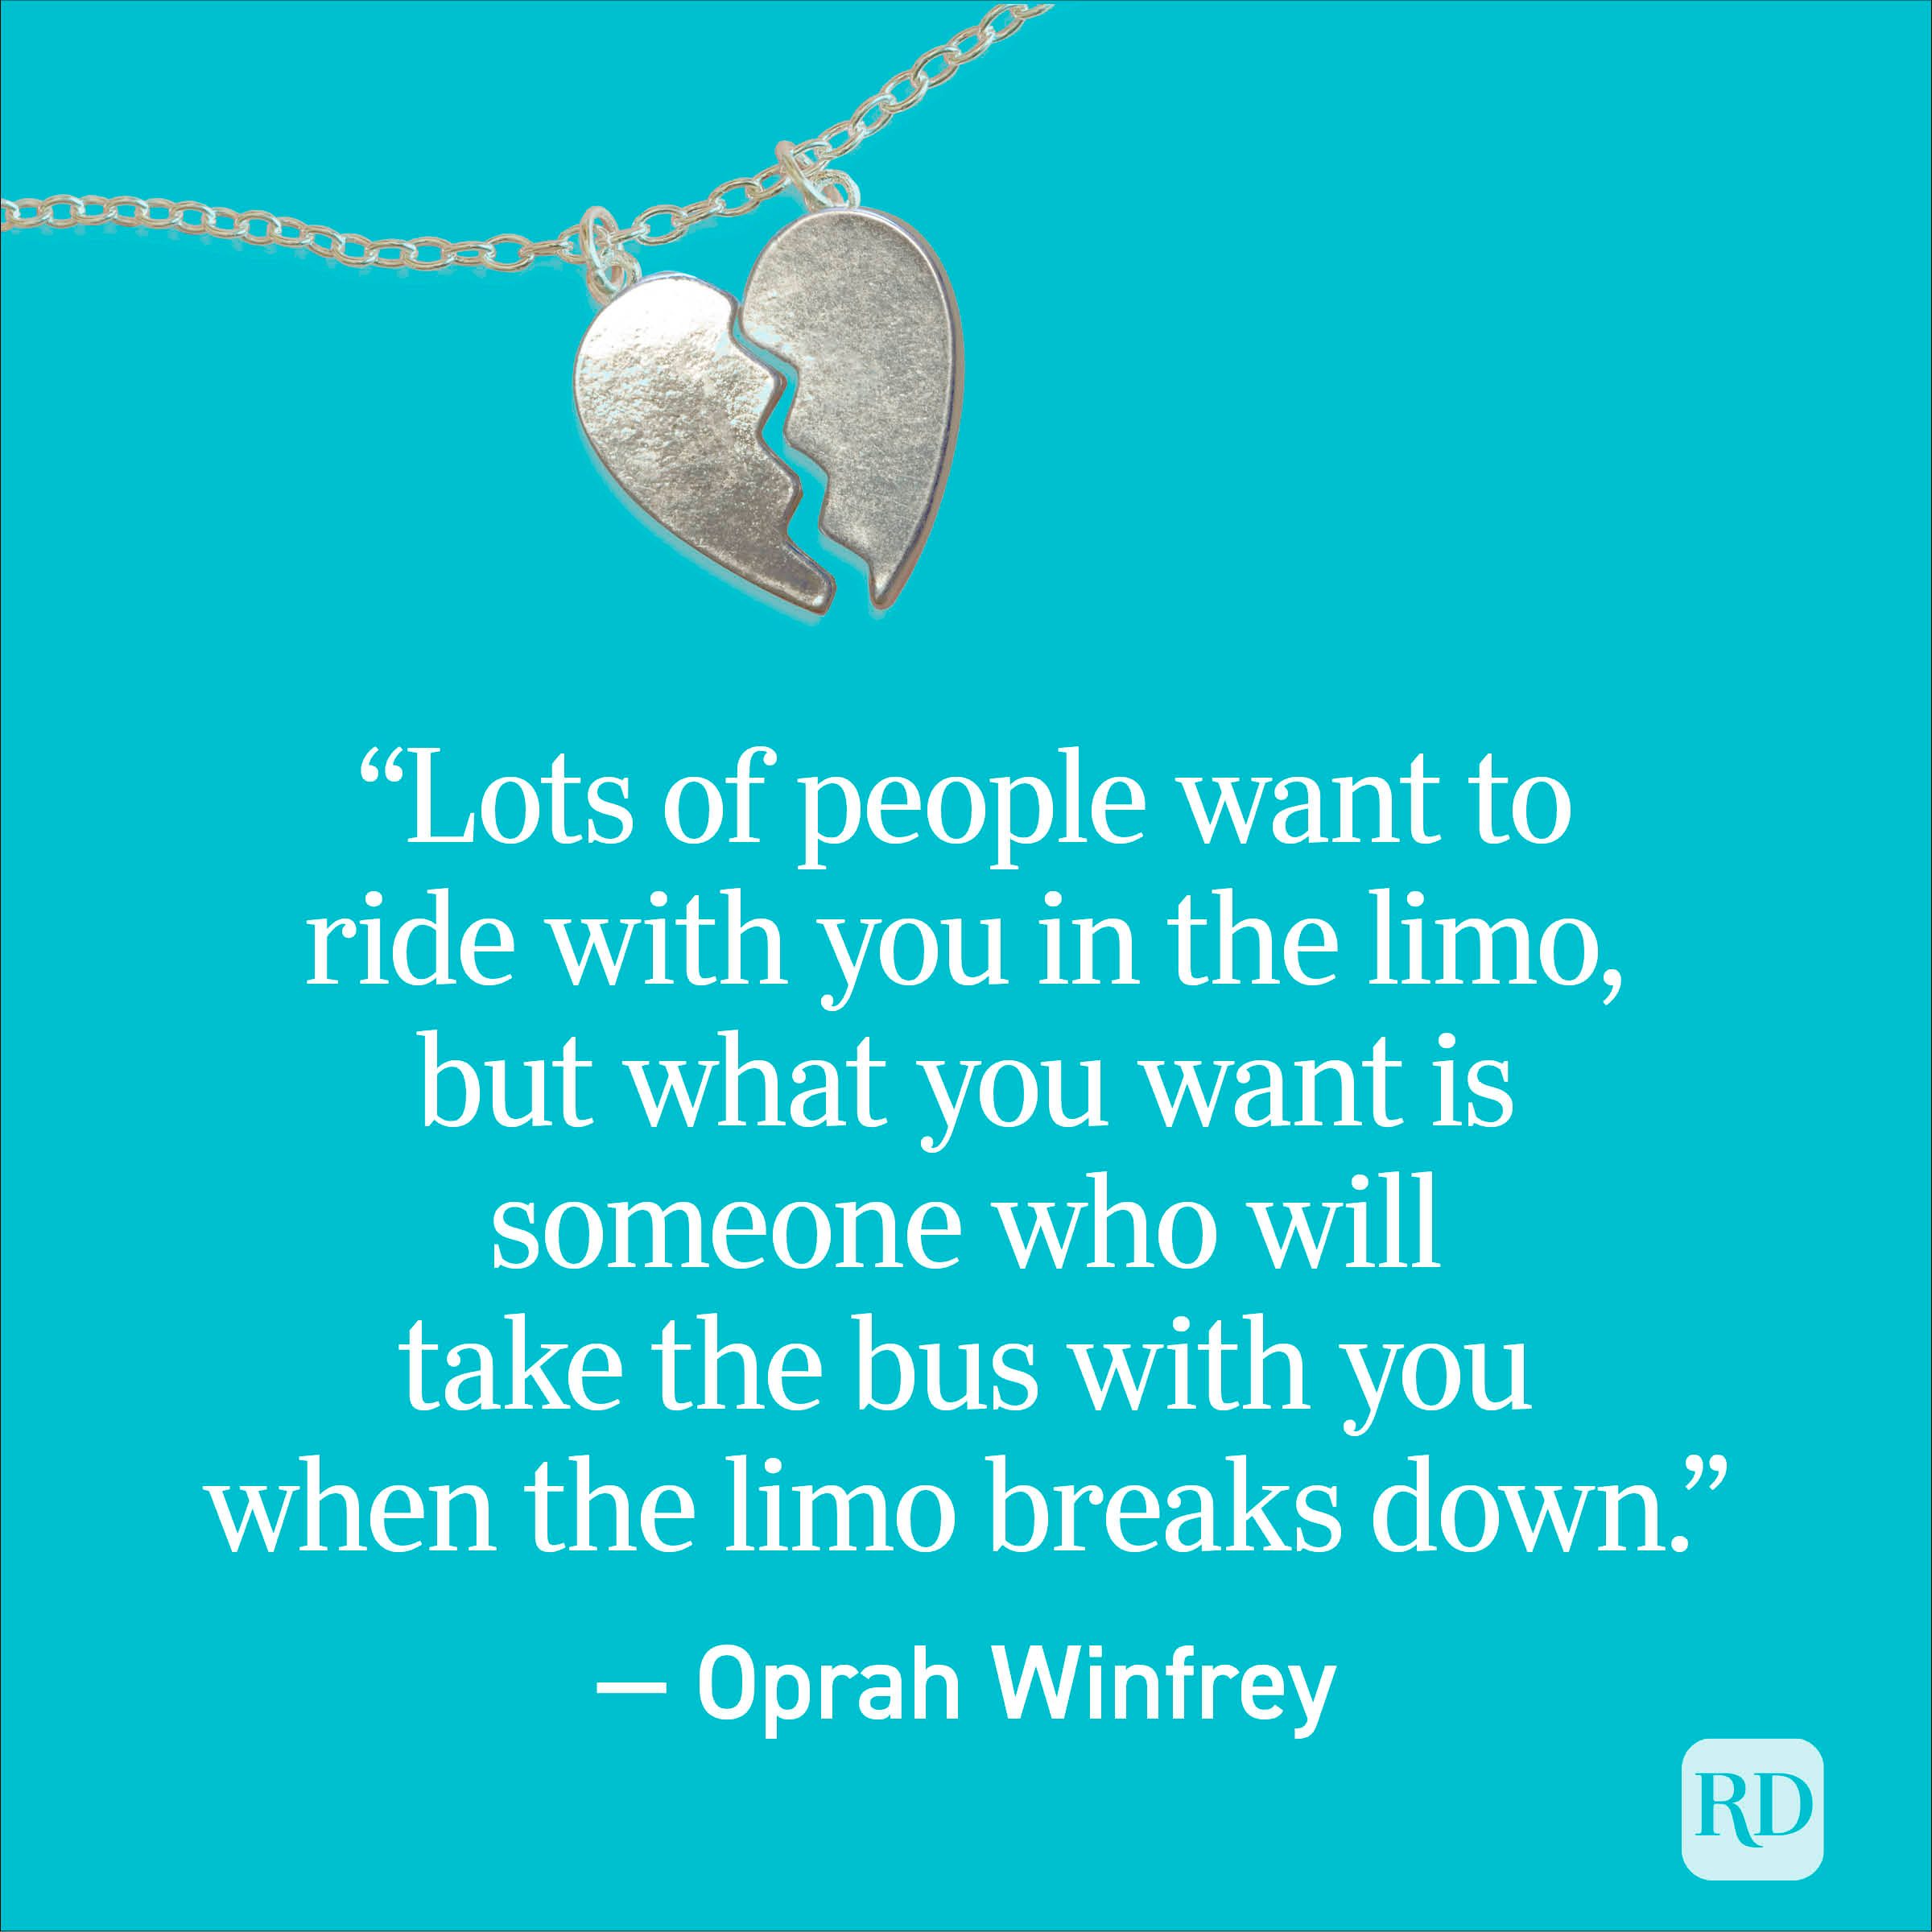 "Lots of people want to ride with you in the limo, but what you want is someone who will take the bus with you when the limo breaks down." - Oprah Winfrey